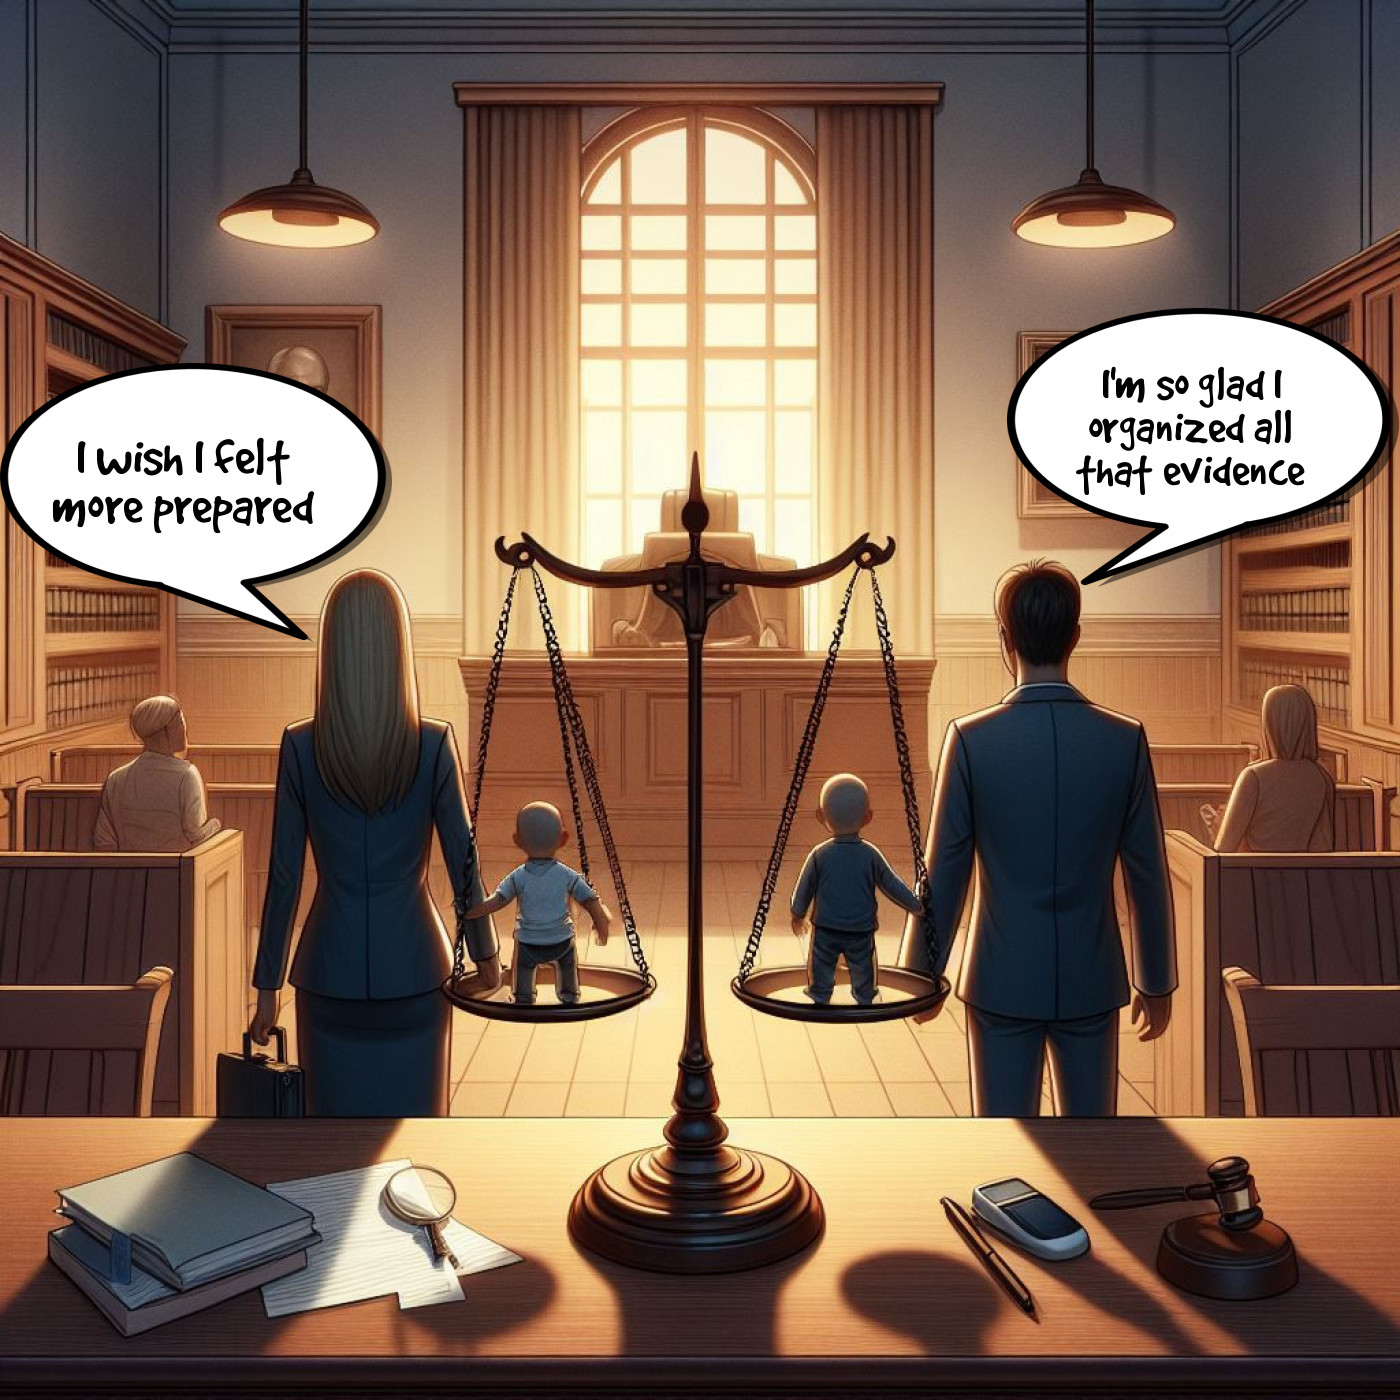  A cartoon of a man and a woman in a courtroom engaged in a temporary custody hearing.